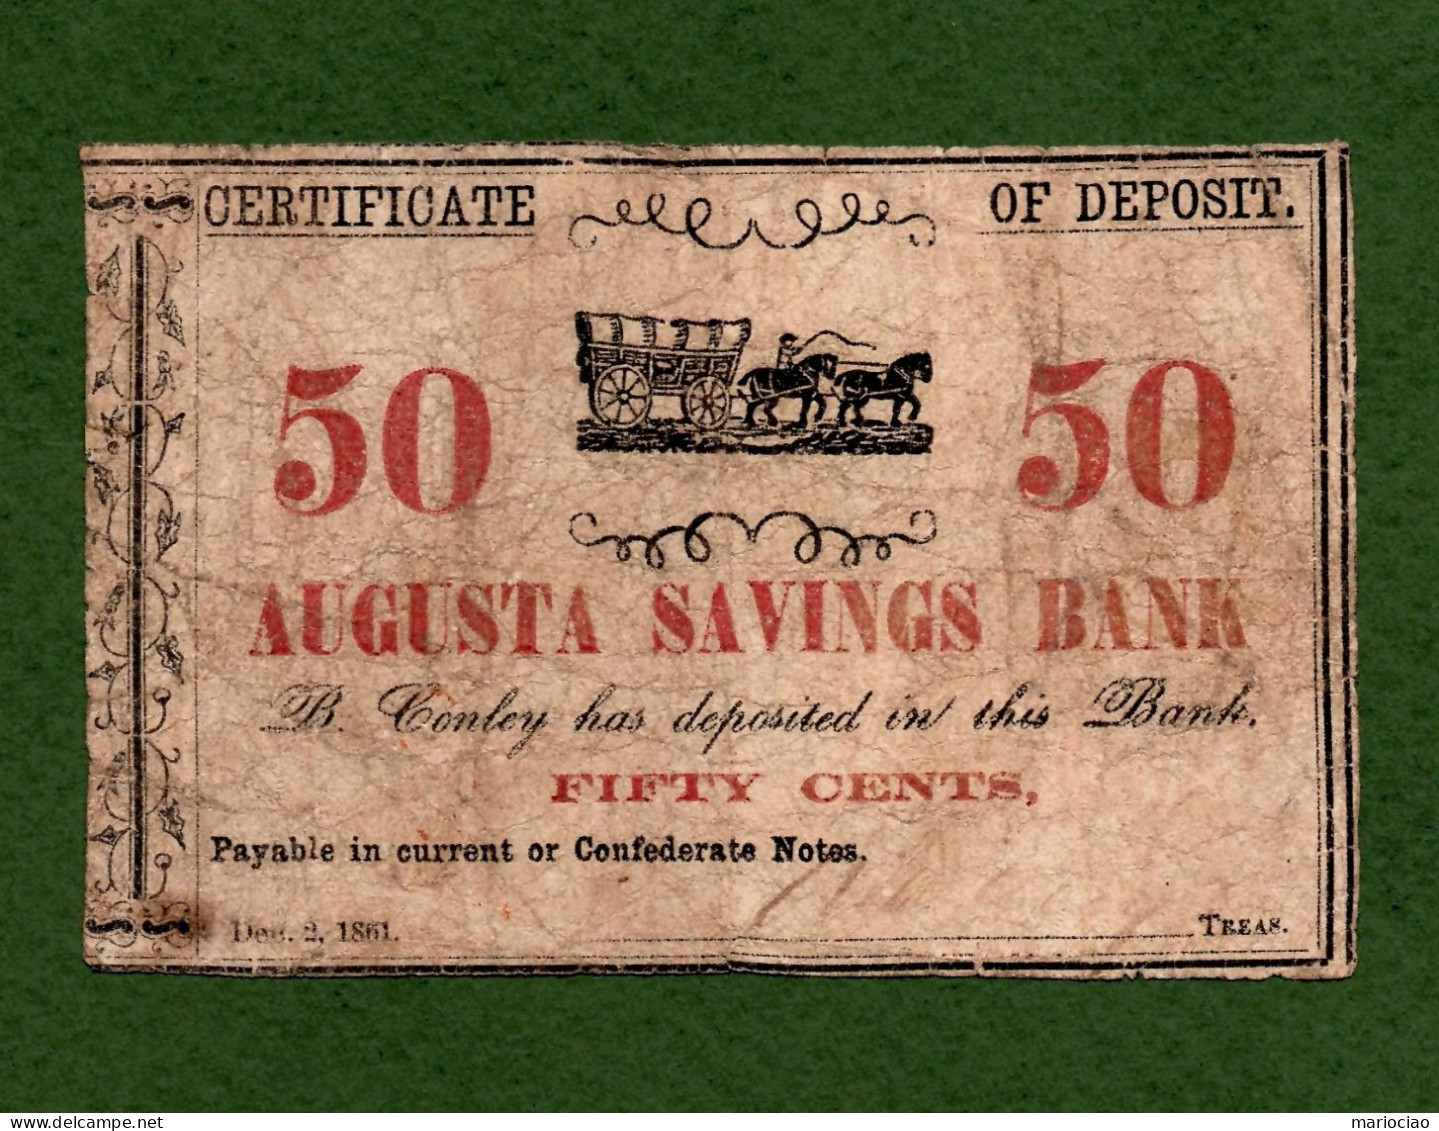 USA Note CIVIL WAR 1861 Augusta Savings Bank GEORGIA Pay 50 Cents In CONFEDERATE Notes COVERED WAGON - Confederate Currency (1861-1864)